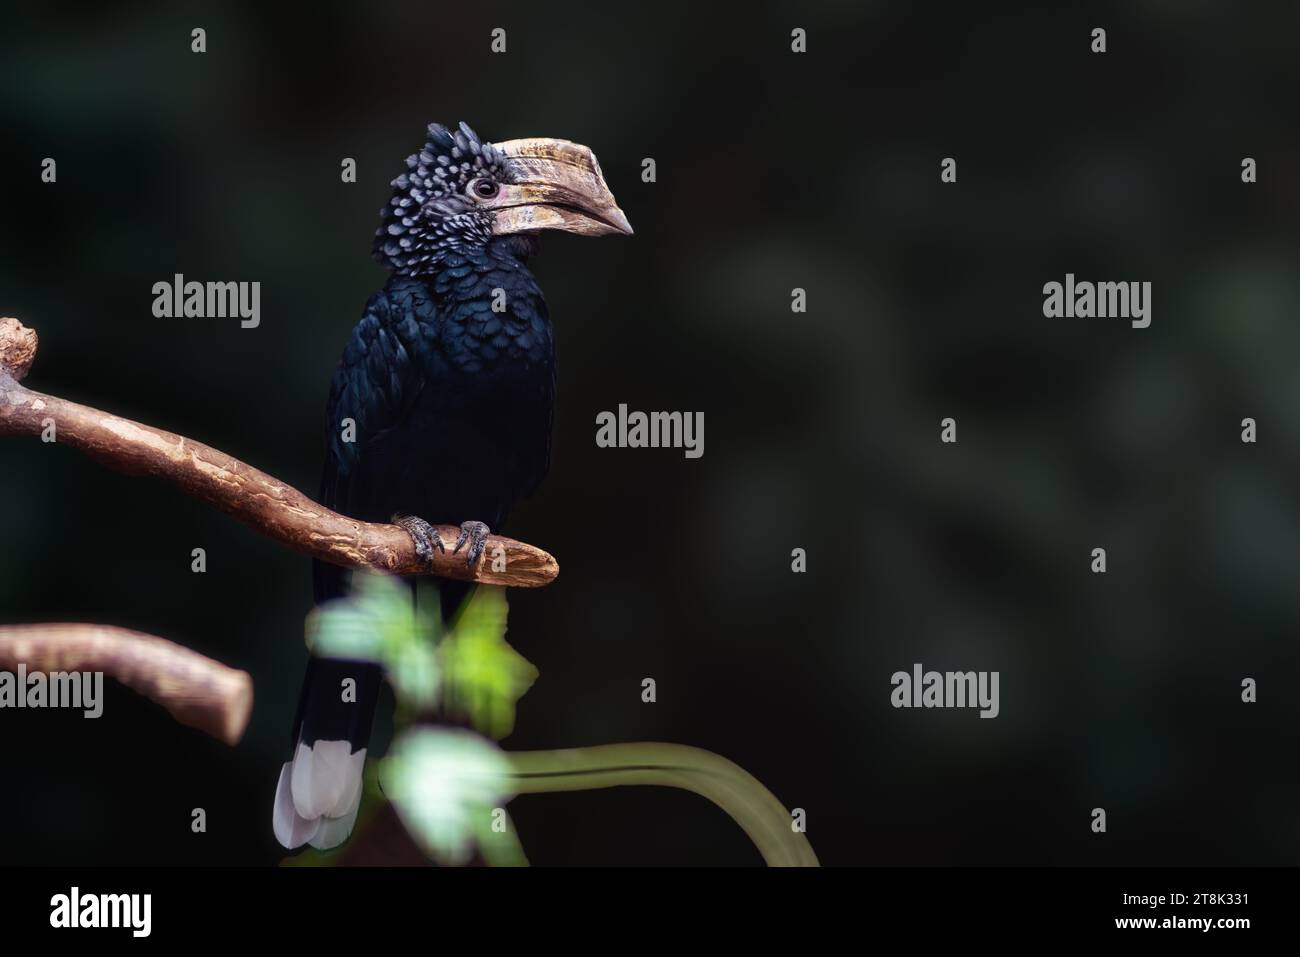 Female Silvery-Cheeked Hornbill bird (bycanistes brevis) Stock Photo